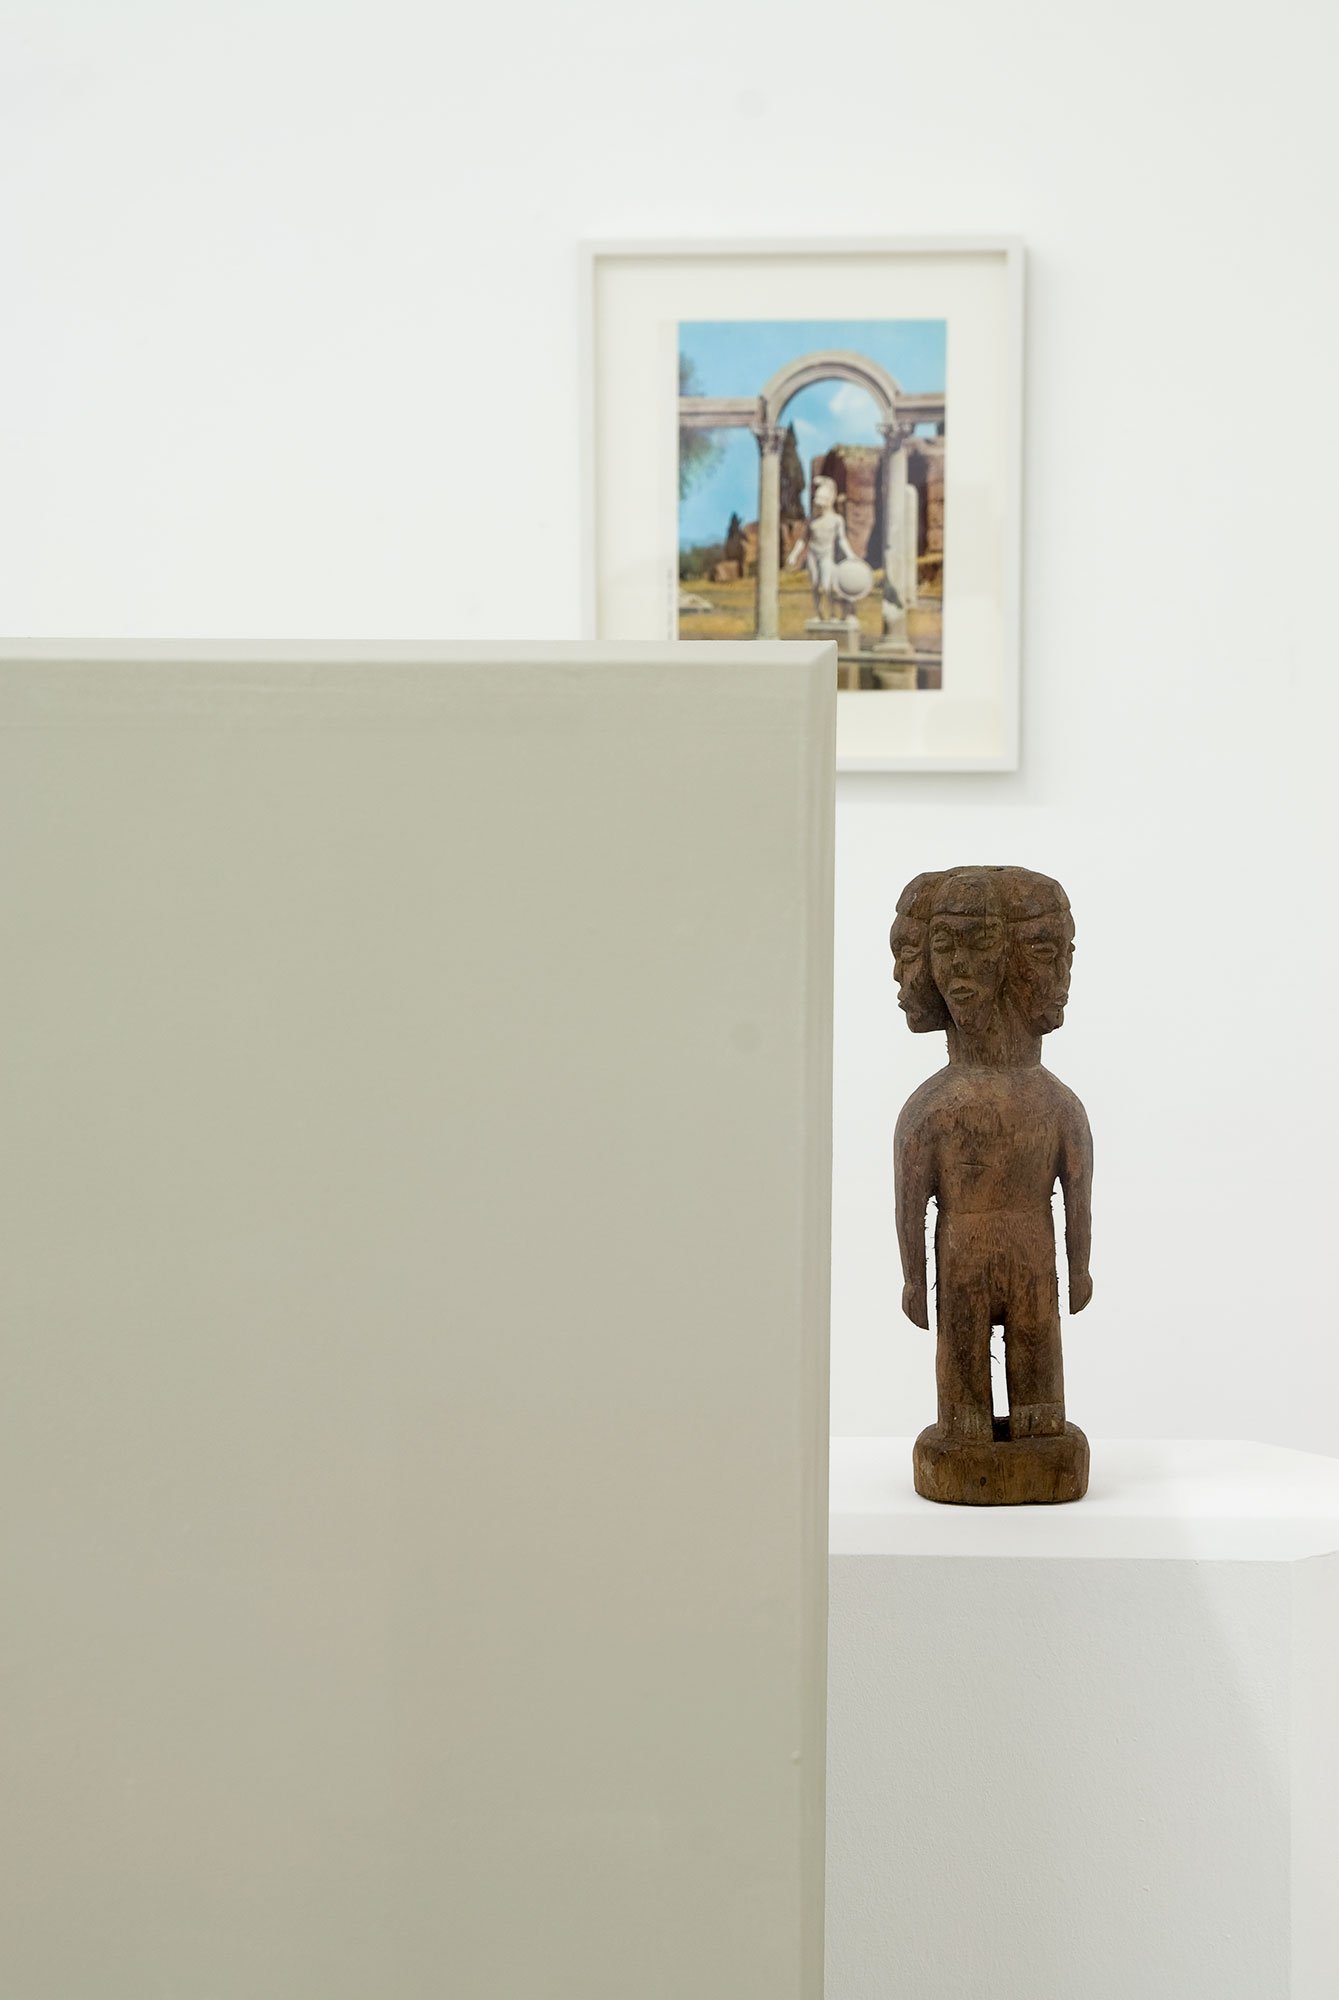 Haris Epaminonda, detail, installation with two plinths (143 x 34.6 x 35.3 cm and 107 x 29.9 x 21.1 cm), African found statuette (height: 26 cm) and framed image (28.7 x 34.4 cm). Installation view, VOL. IV, Rodeo, Istanbul, 2009